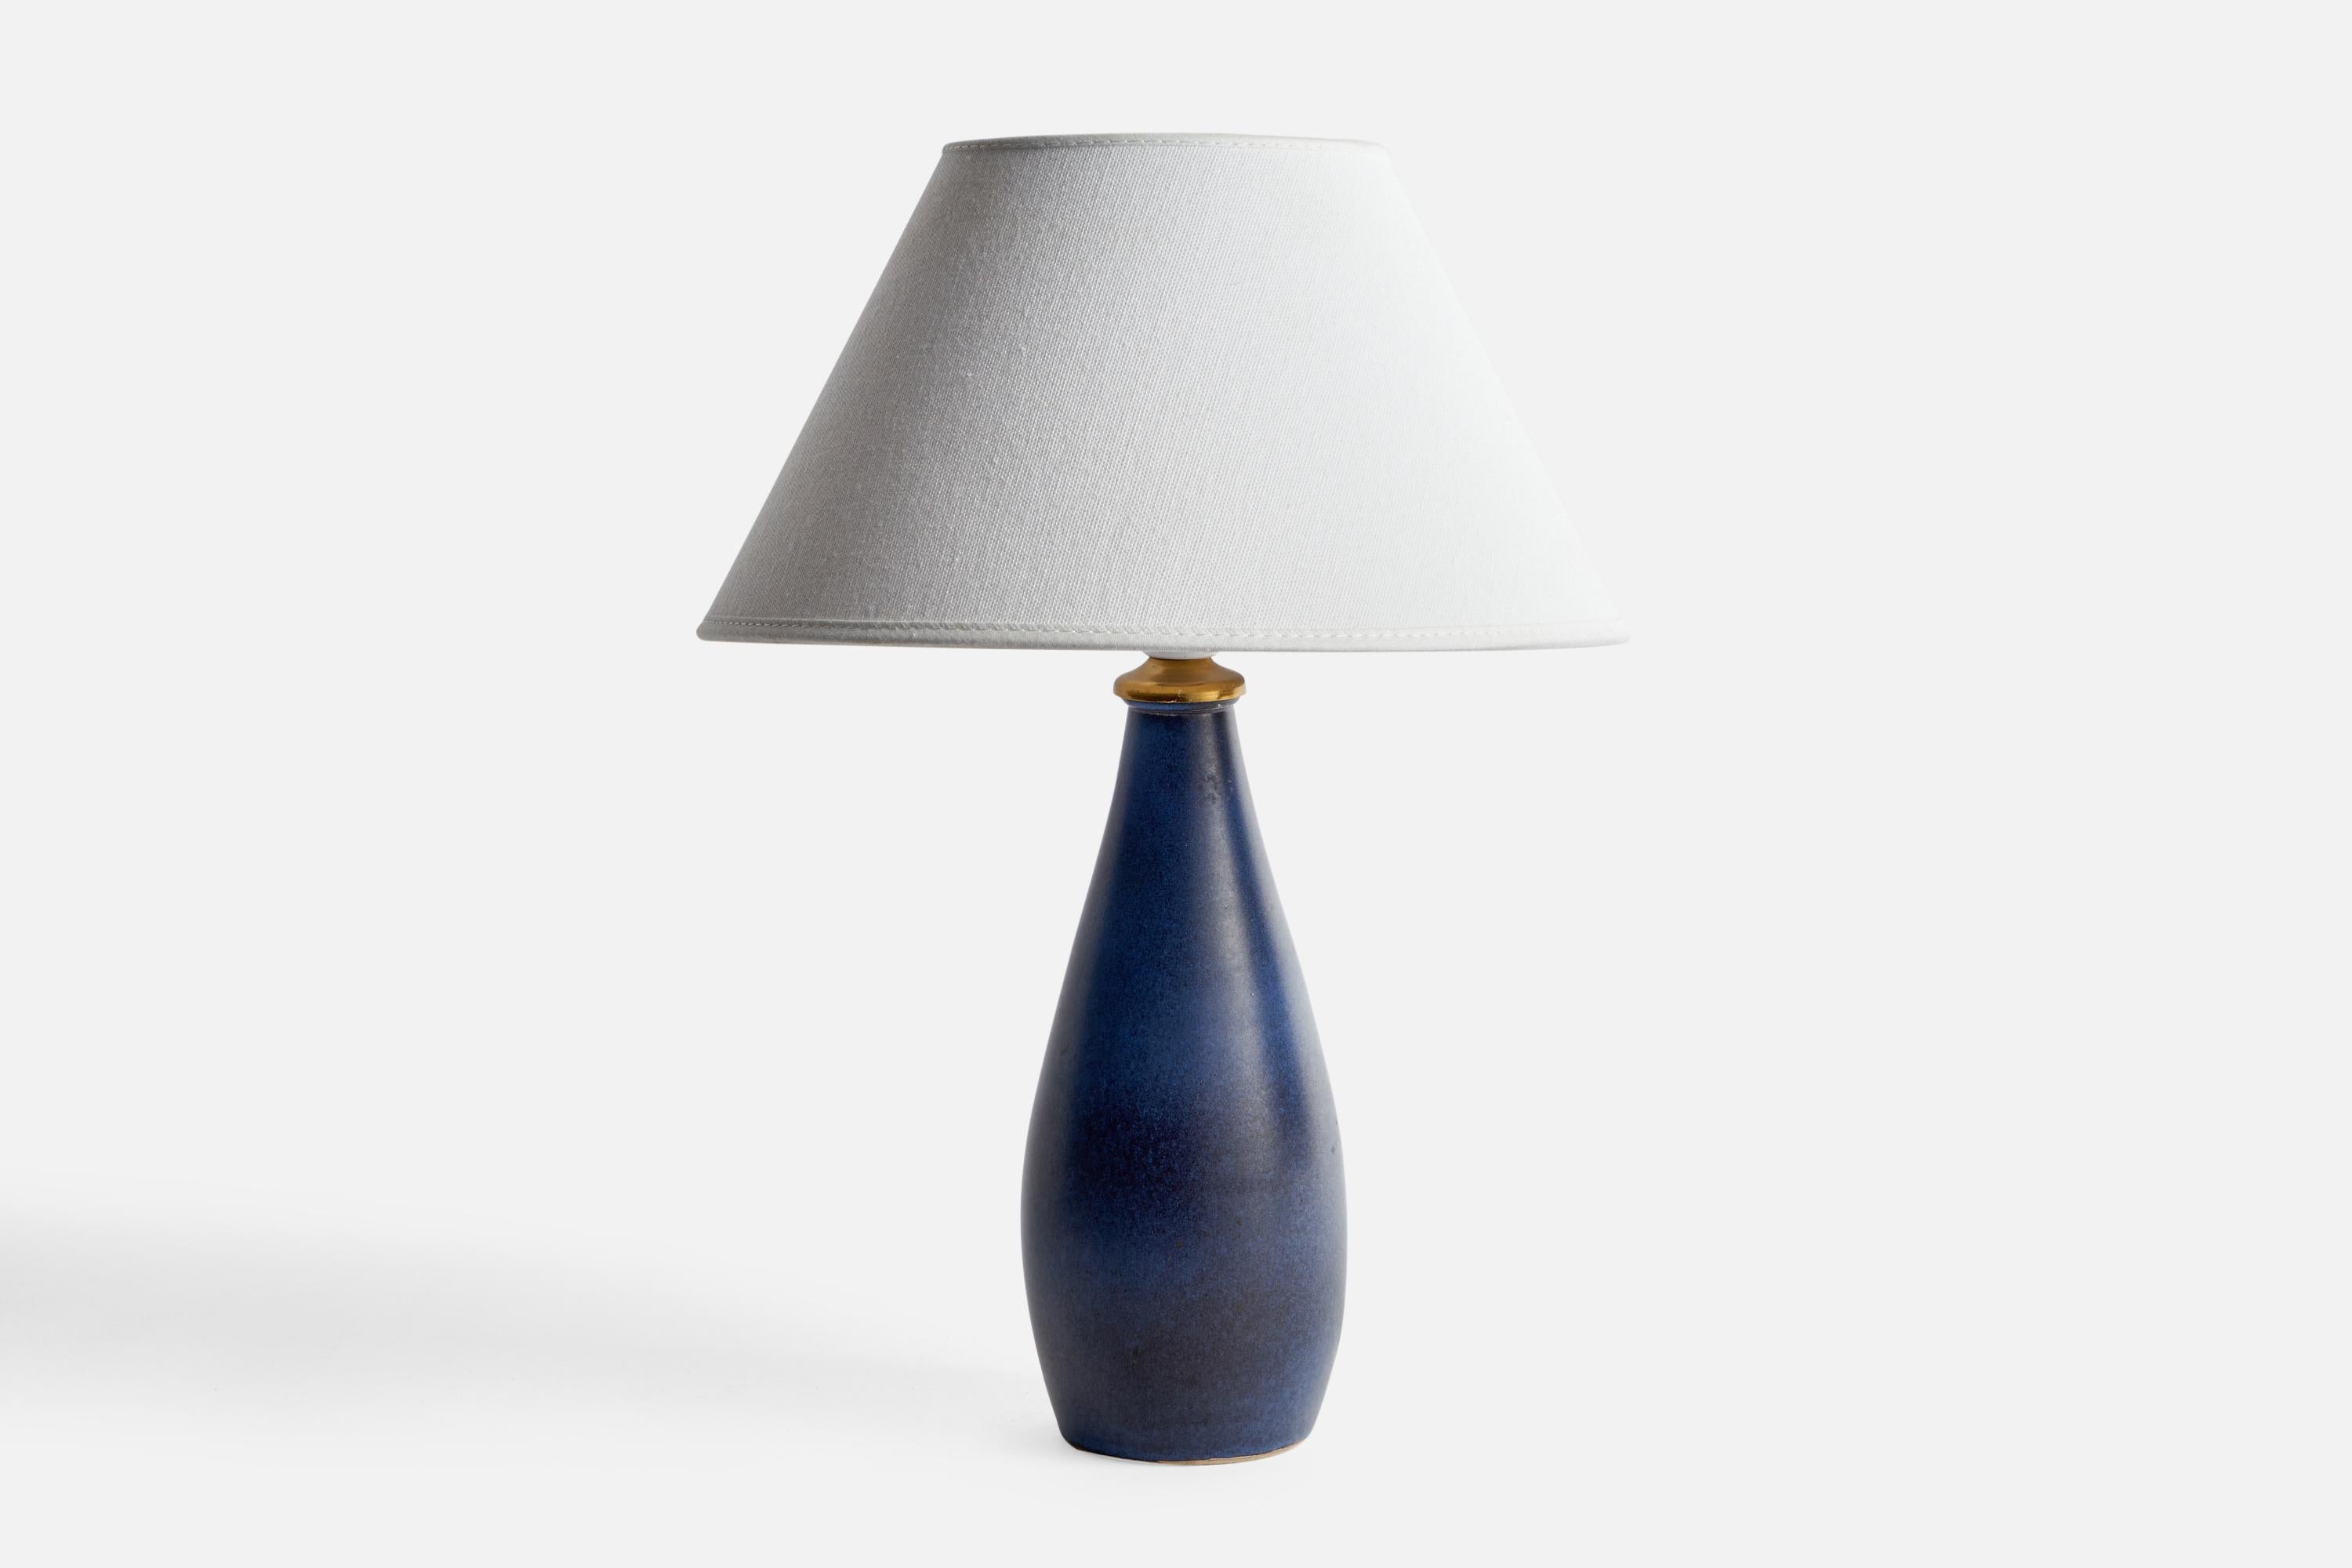 A blue-glazed stoneware and brass table lamp designed and produced by Klosterstad Ceramics, Sweden, c. 1960s.

Dimensions of Lamp (inches): 10.7” H x 3.55” Diameter
Dimensions of Shade (inches): 4.5” Top Diameter x 10” Bottom Diameter x 5.25”